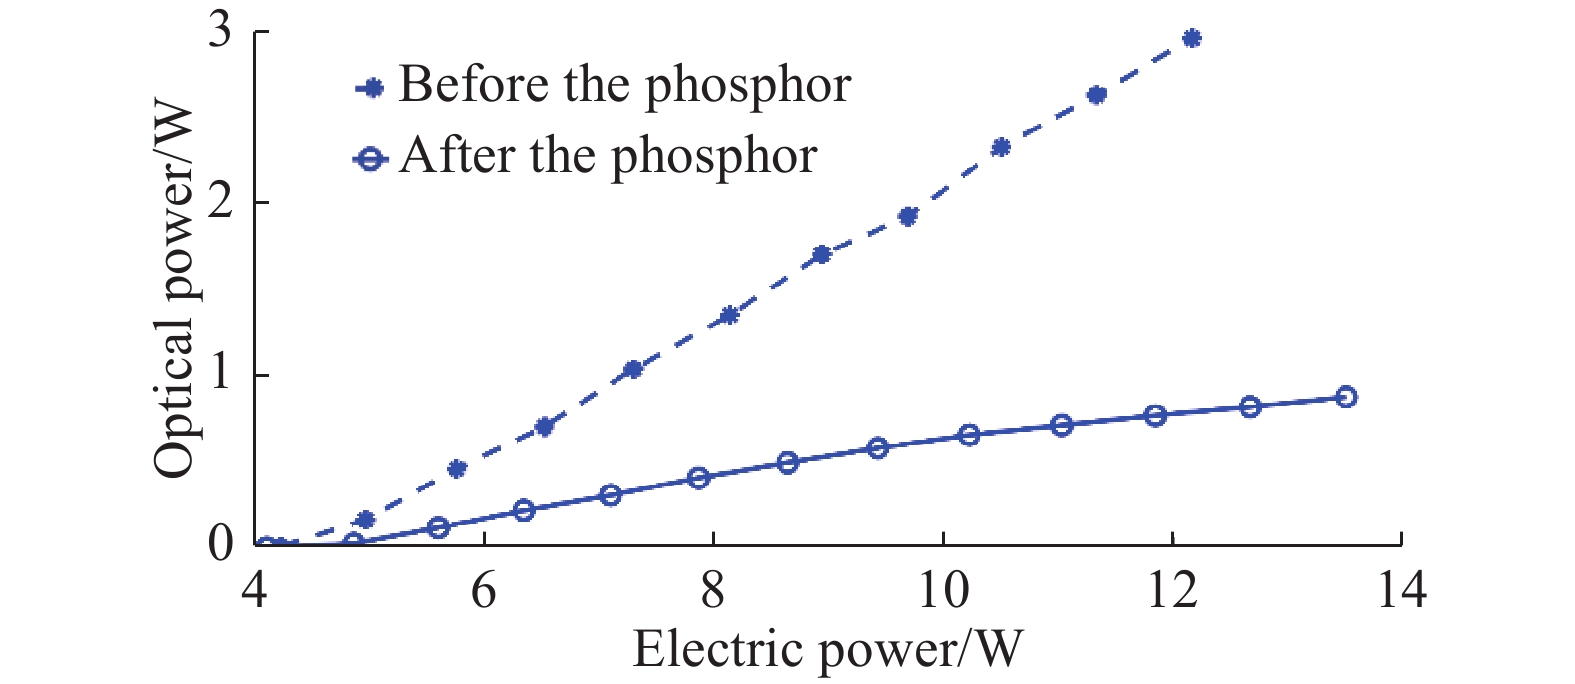 Optical power of laser-driven white source under different power supplies